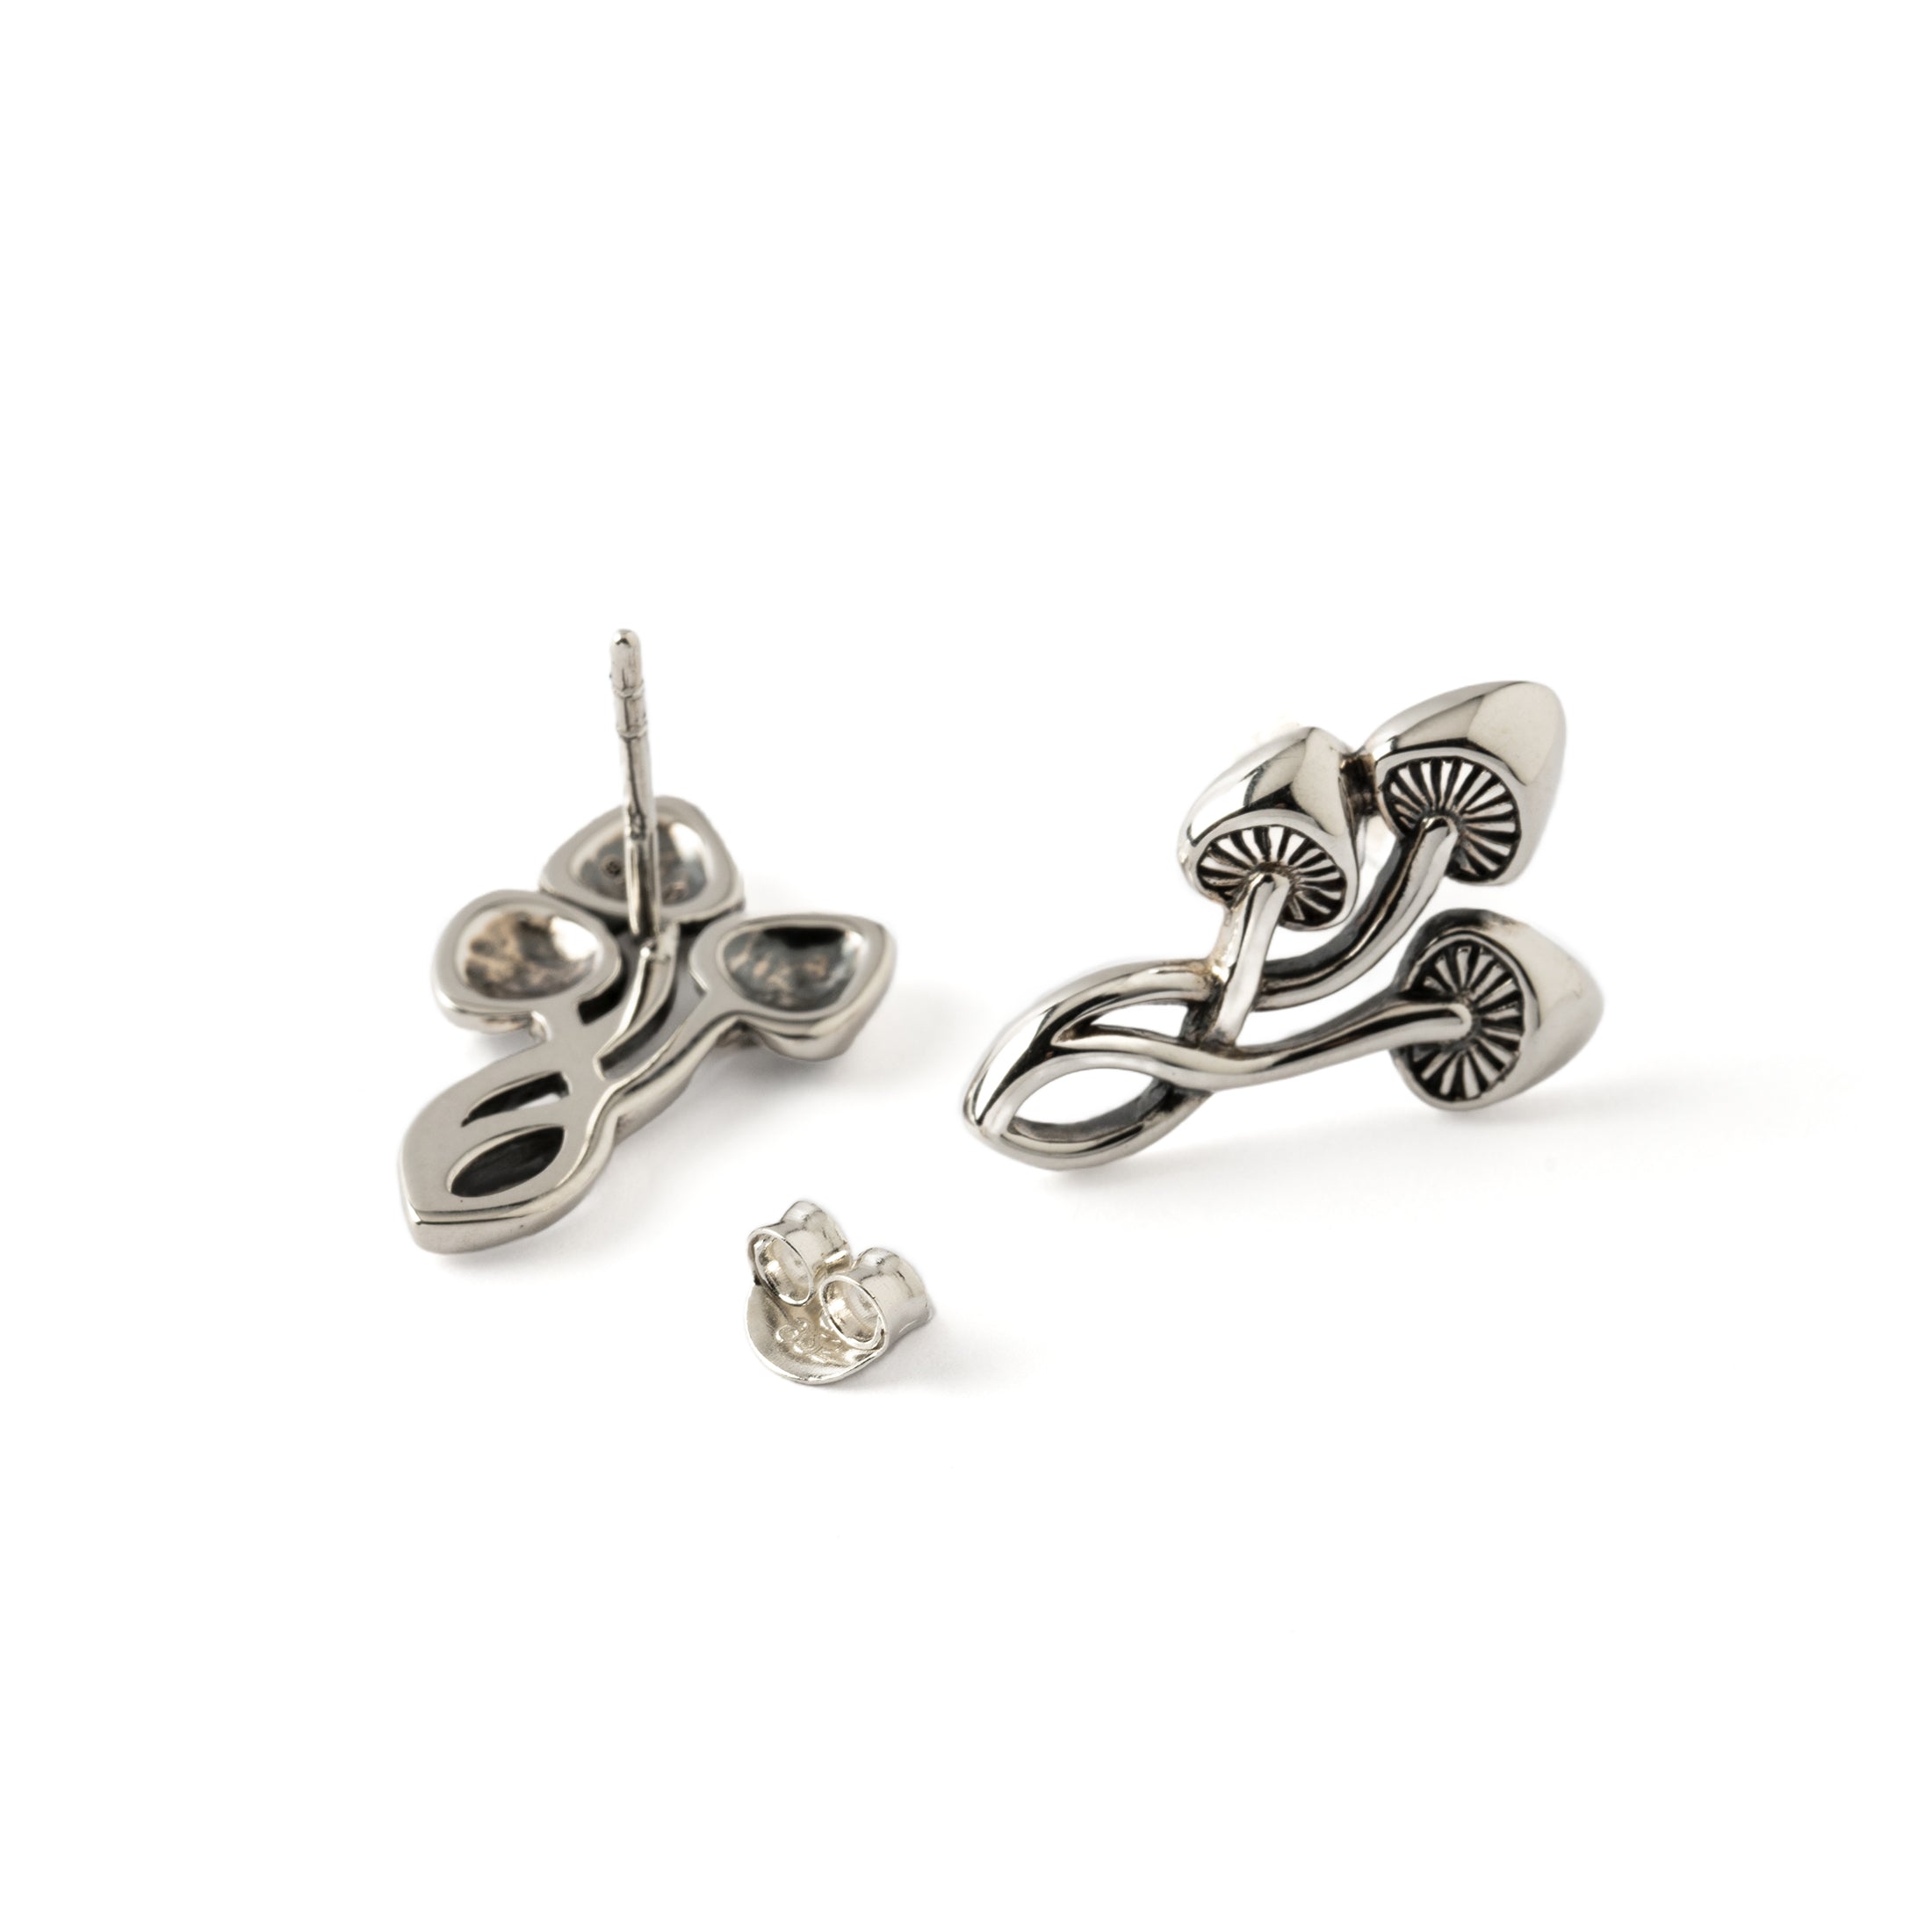 Mushroom Magic silver Stud earrings front and back view